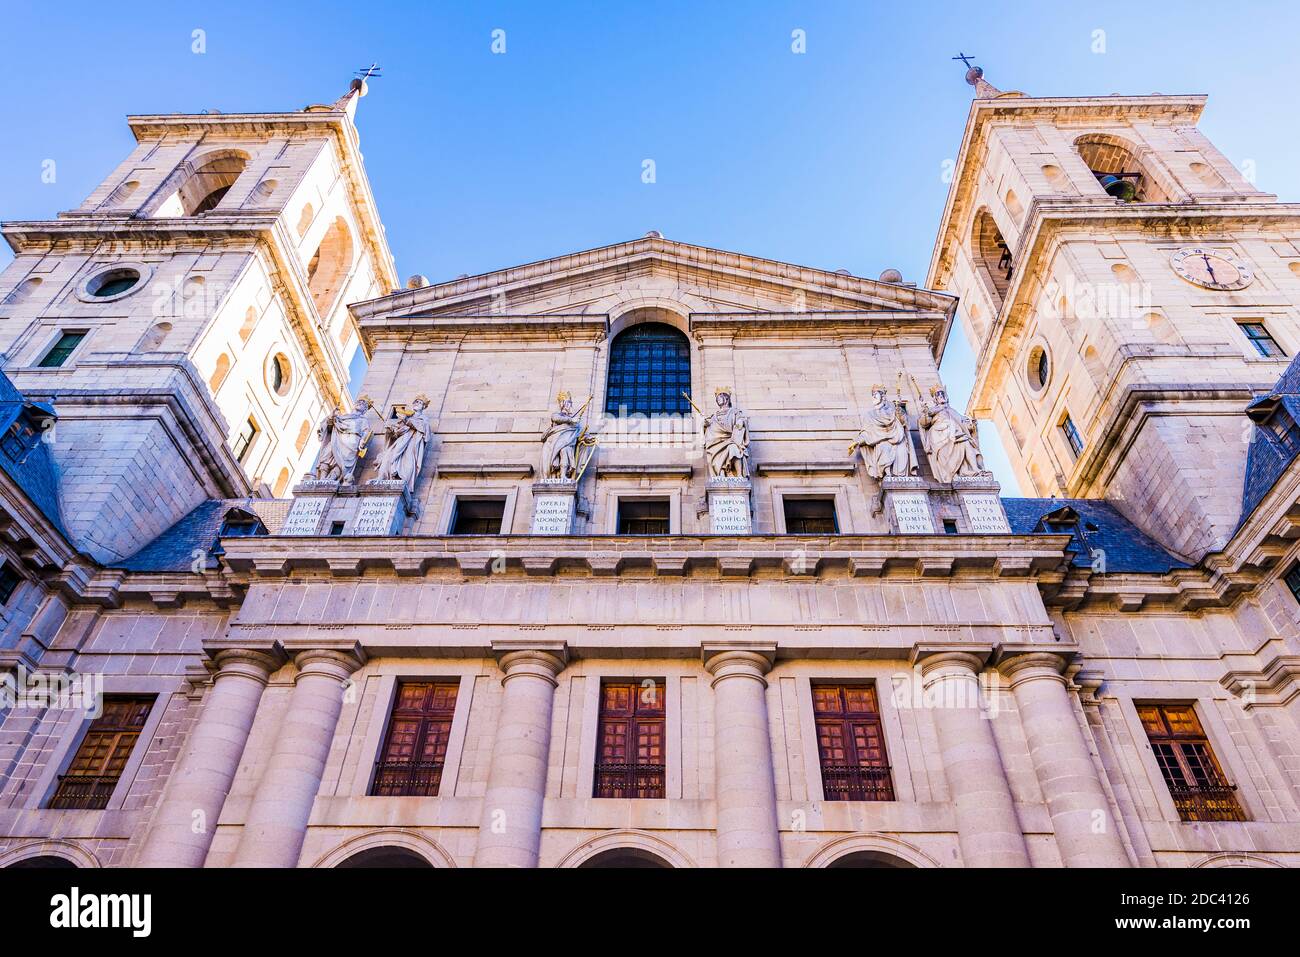 Detail. Courtyard of the Kings and the Basilica. The Royal Site of San Lorenzo de El Escorial. San Lorenzo de El Escorial, Madrid, Spain, Europe Stock Photo